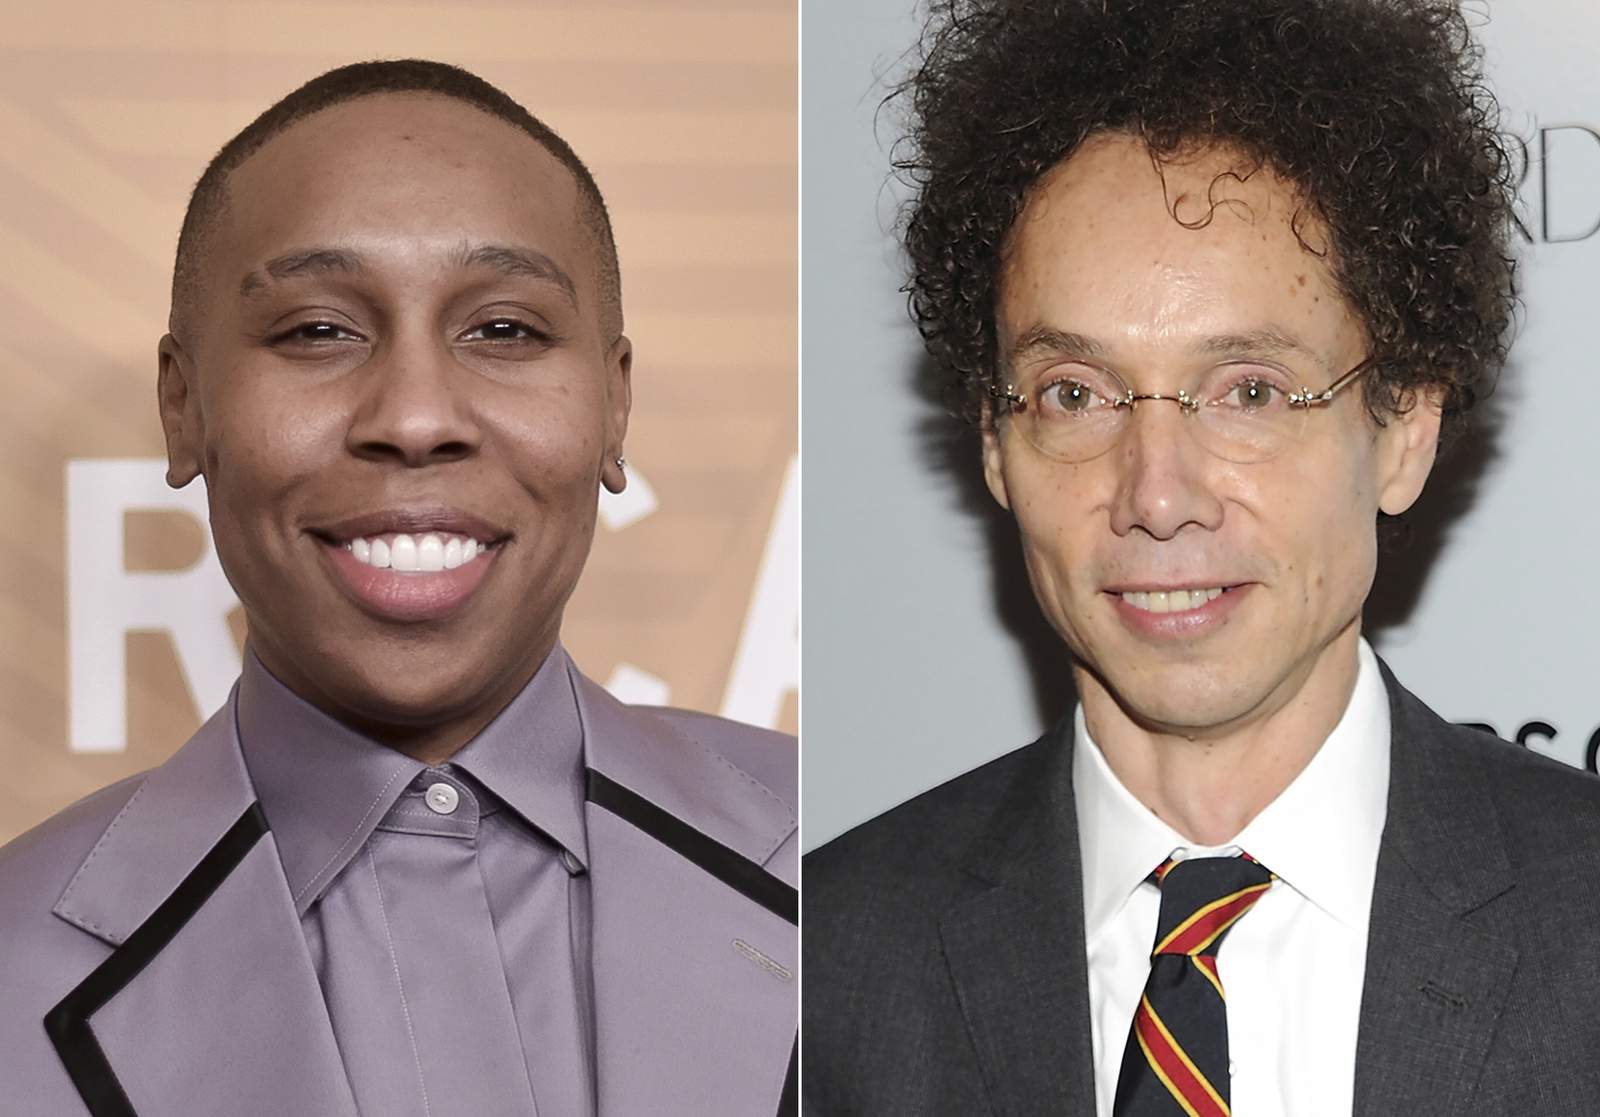 Audible enlists Waithe, Gladwell to help find new talent